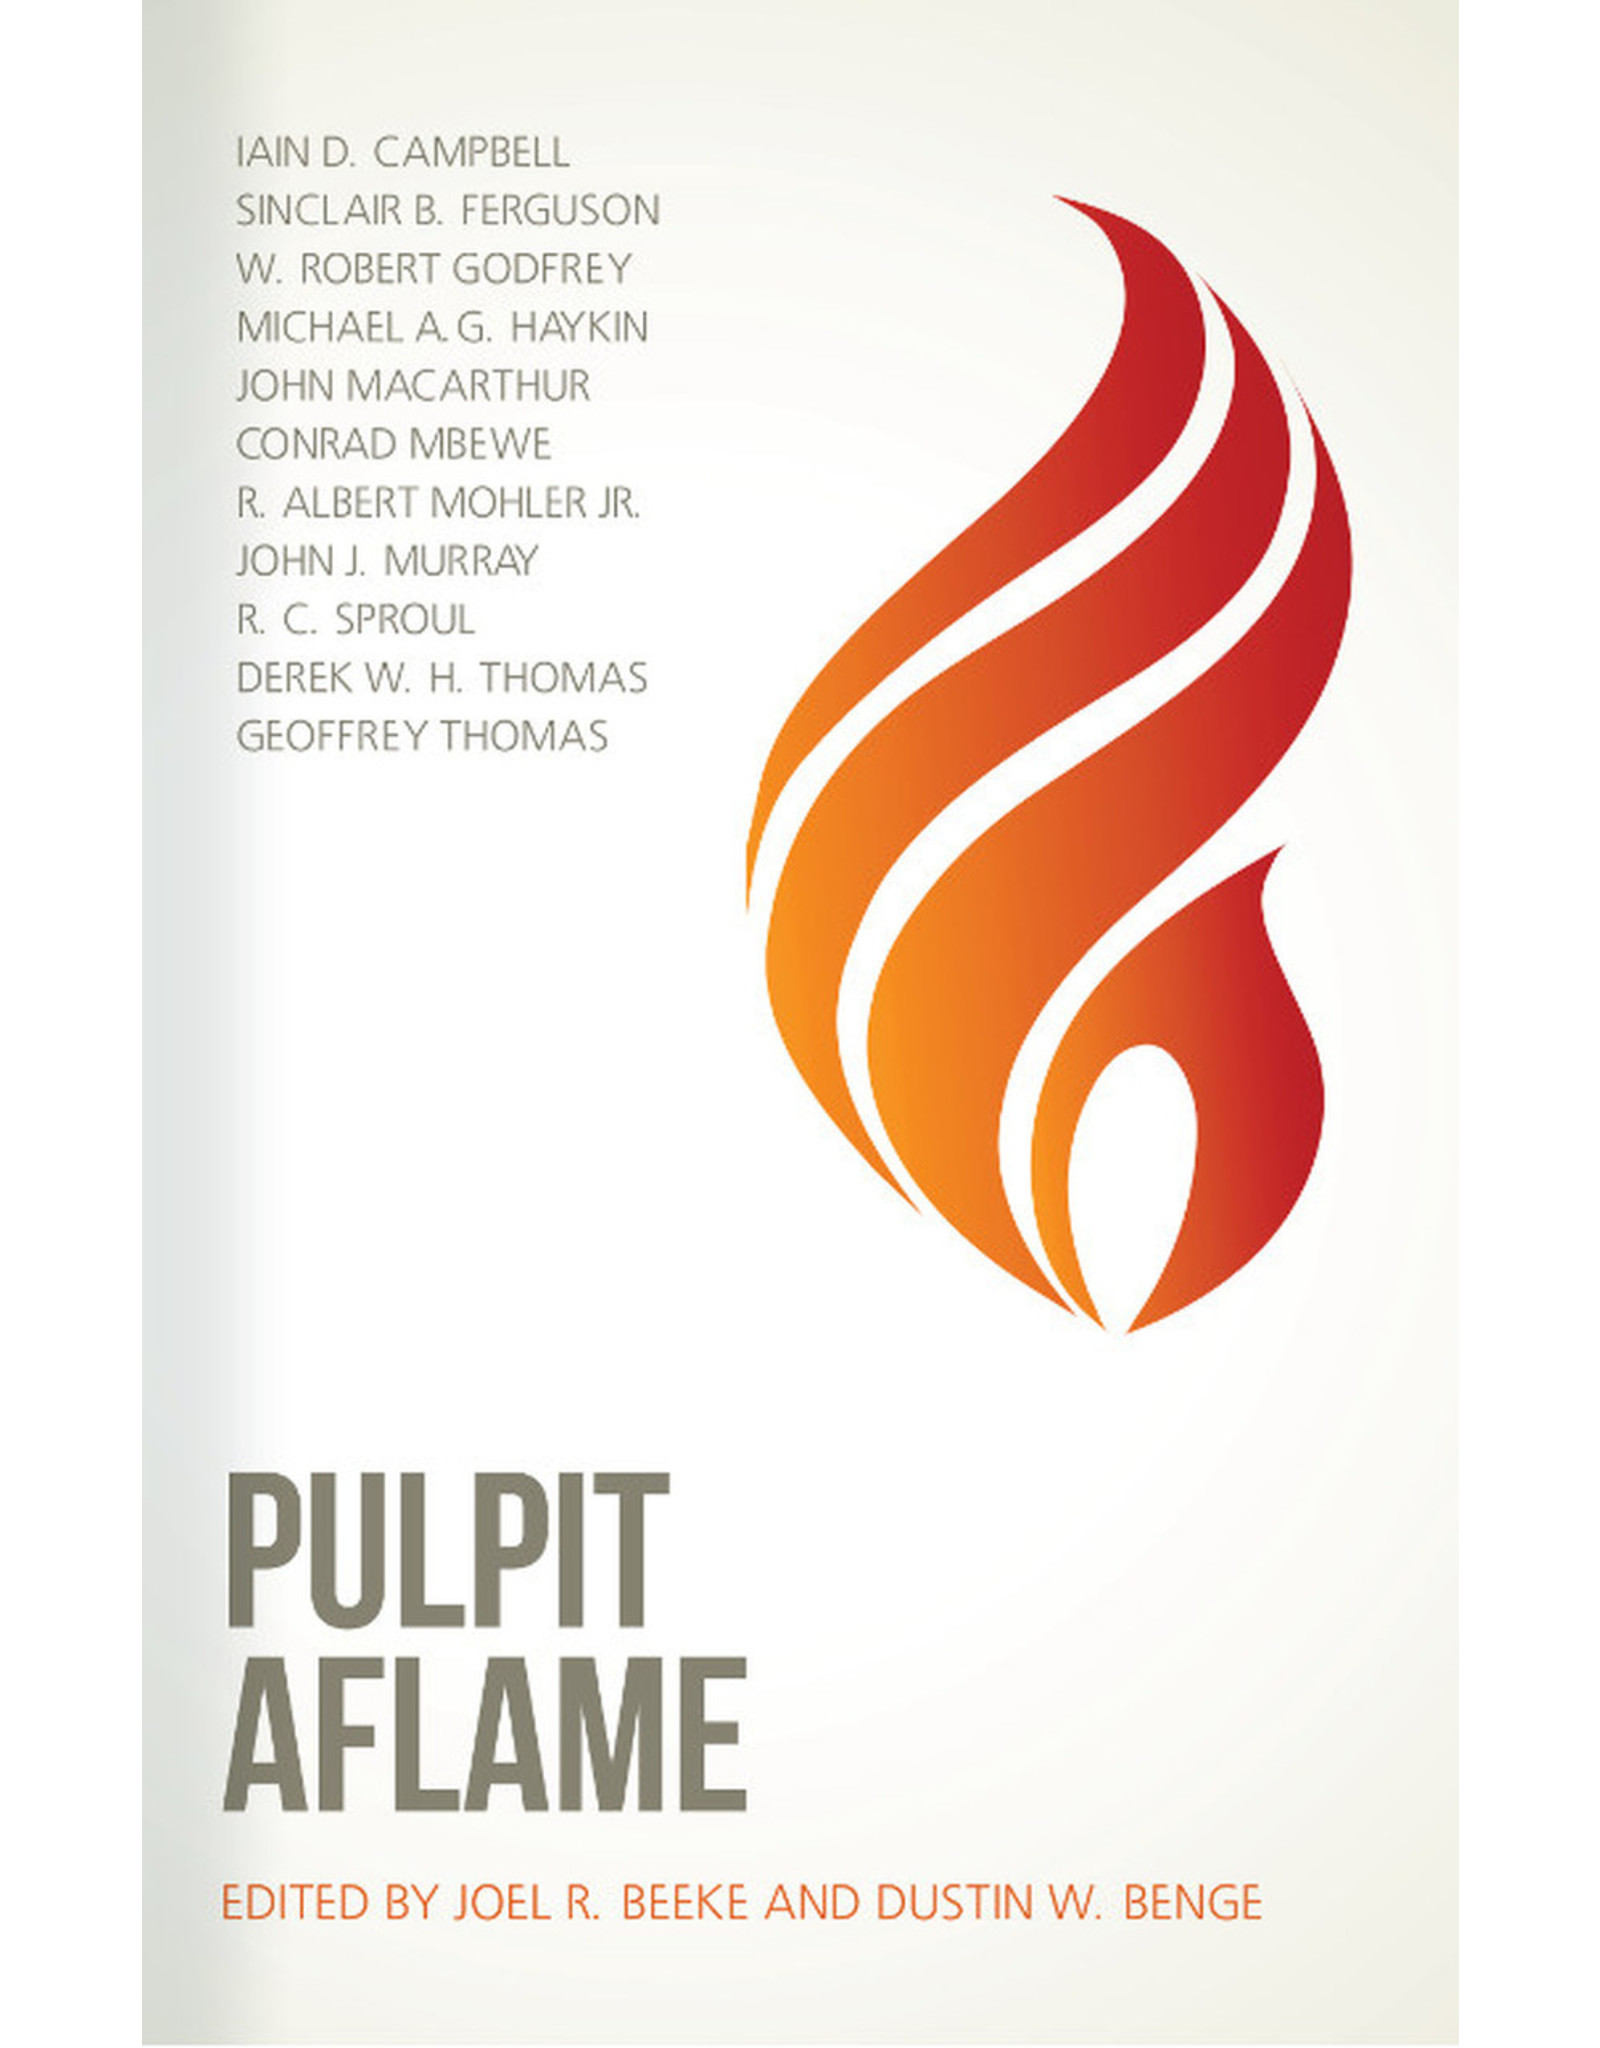 Reformation Heritage Books (RHB) Pulpit Aflame: Essays in Honor of Steve Lawson